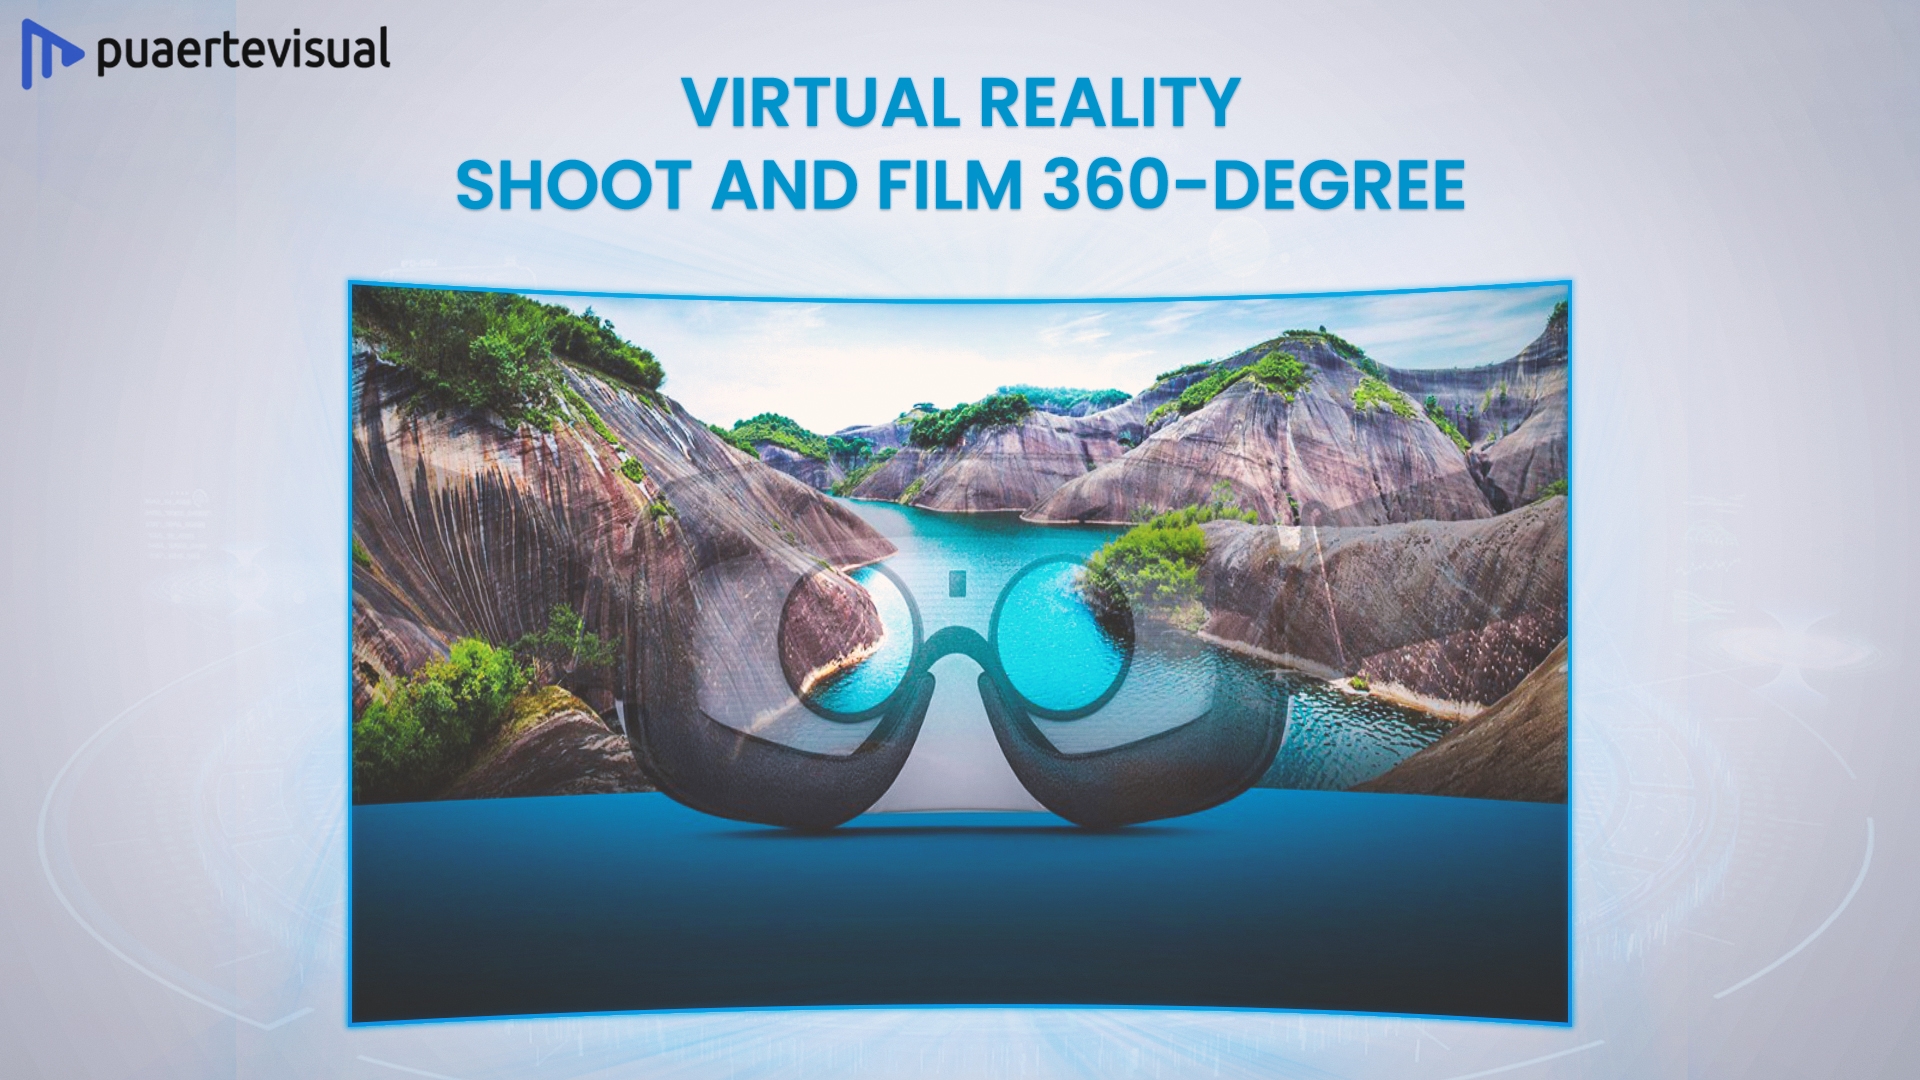 How To Shoot And Film 360 Degree Virtual Reality Content Puaerte Visual